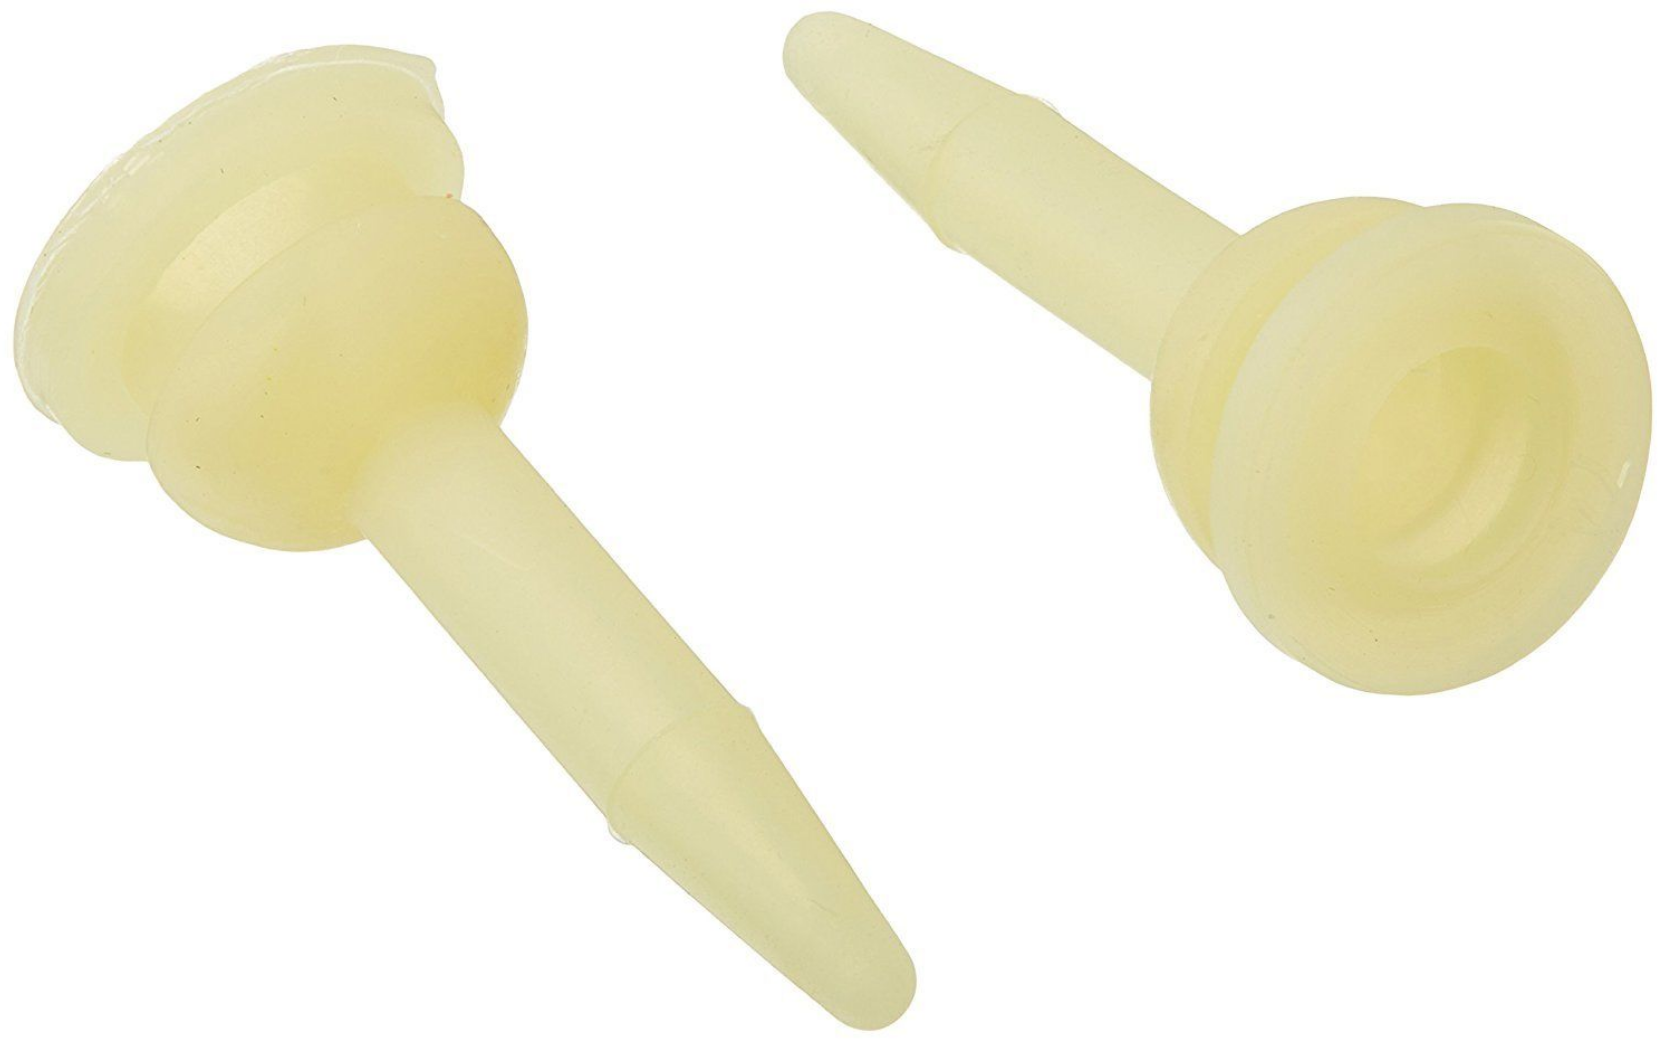 3 PetAg Elongated Nipples to fit PetAg 2 oz. Bottle, Beaphar bottle and our Luer Lock Syringes.